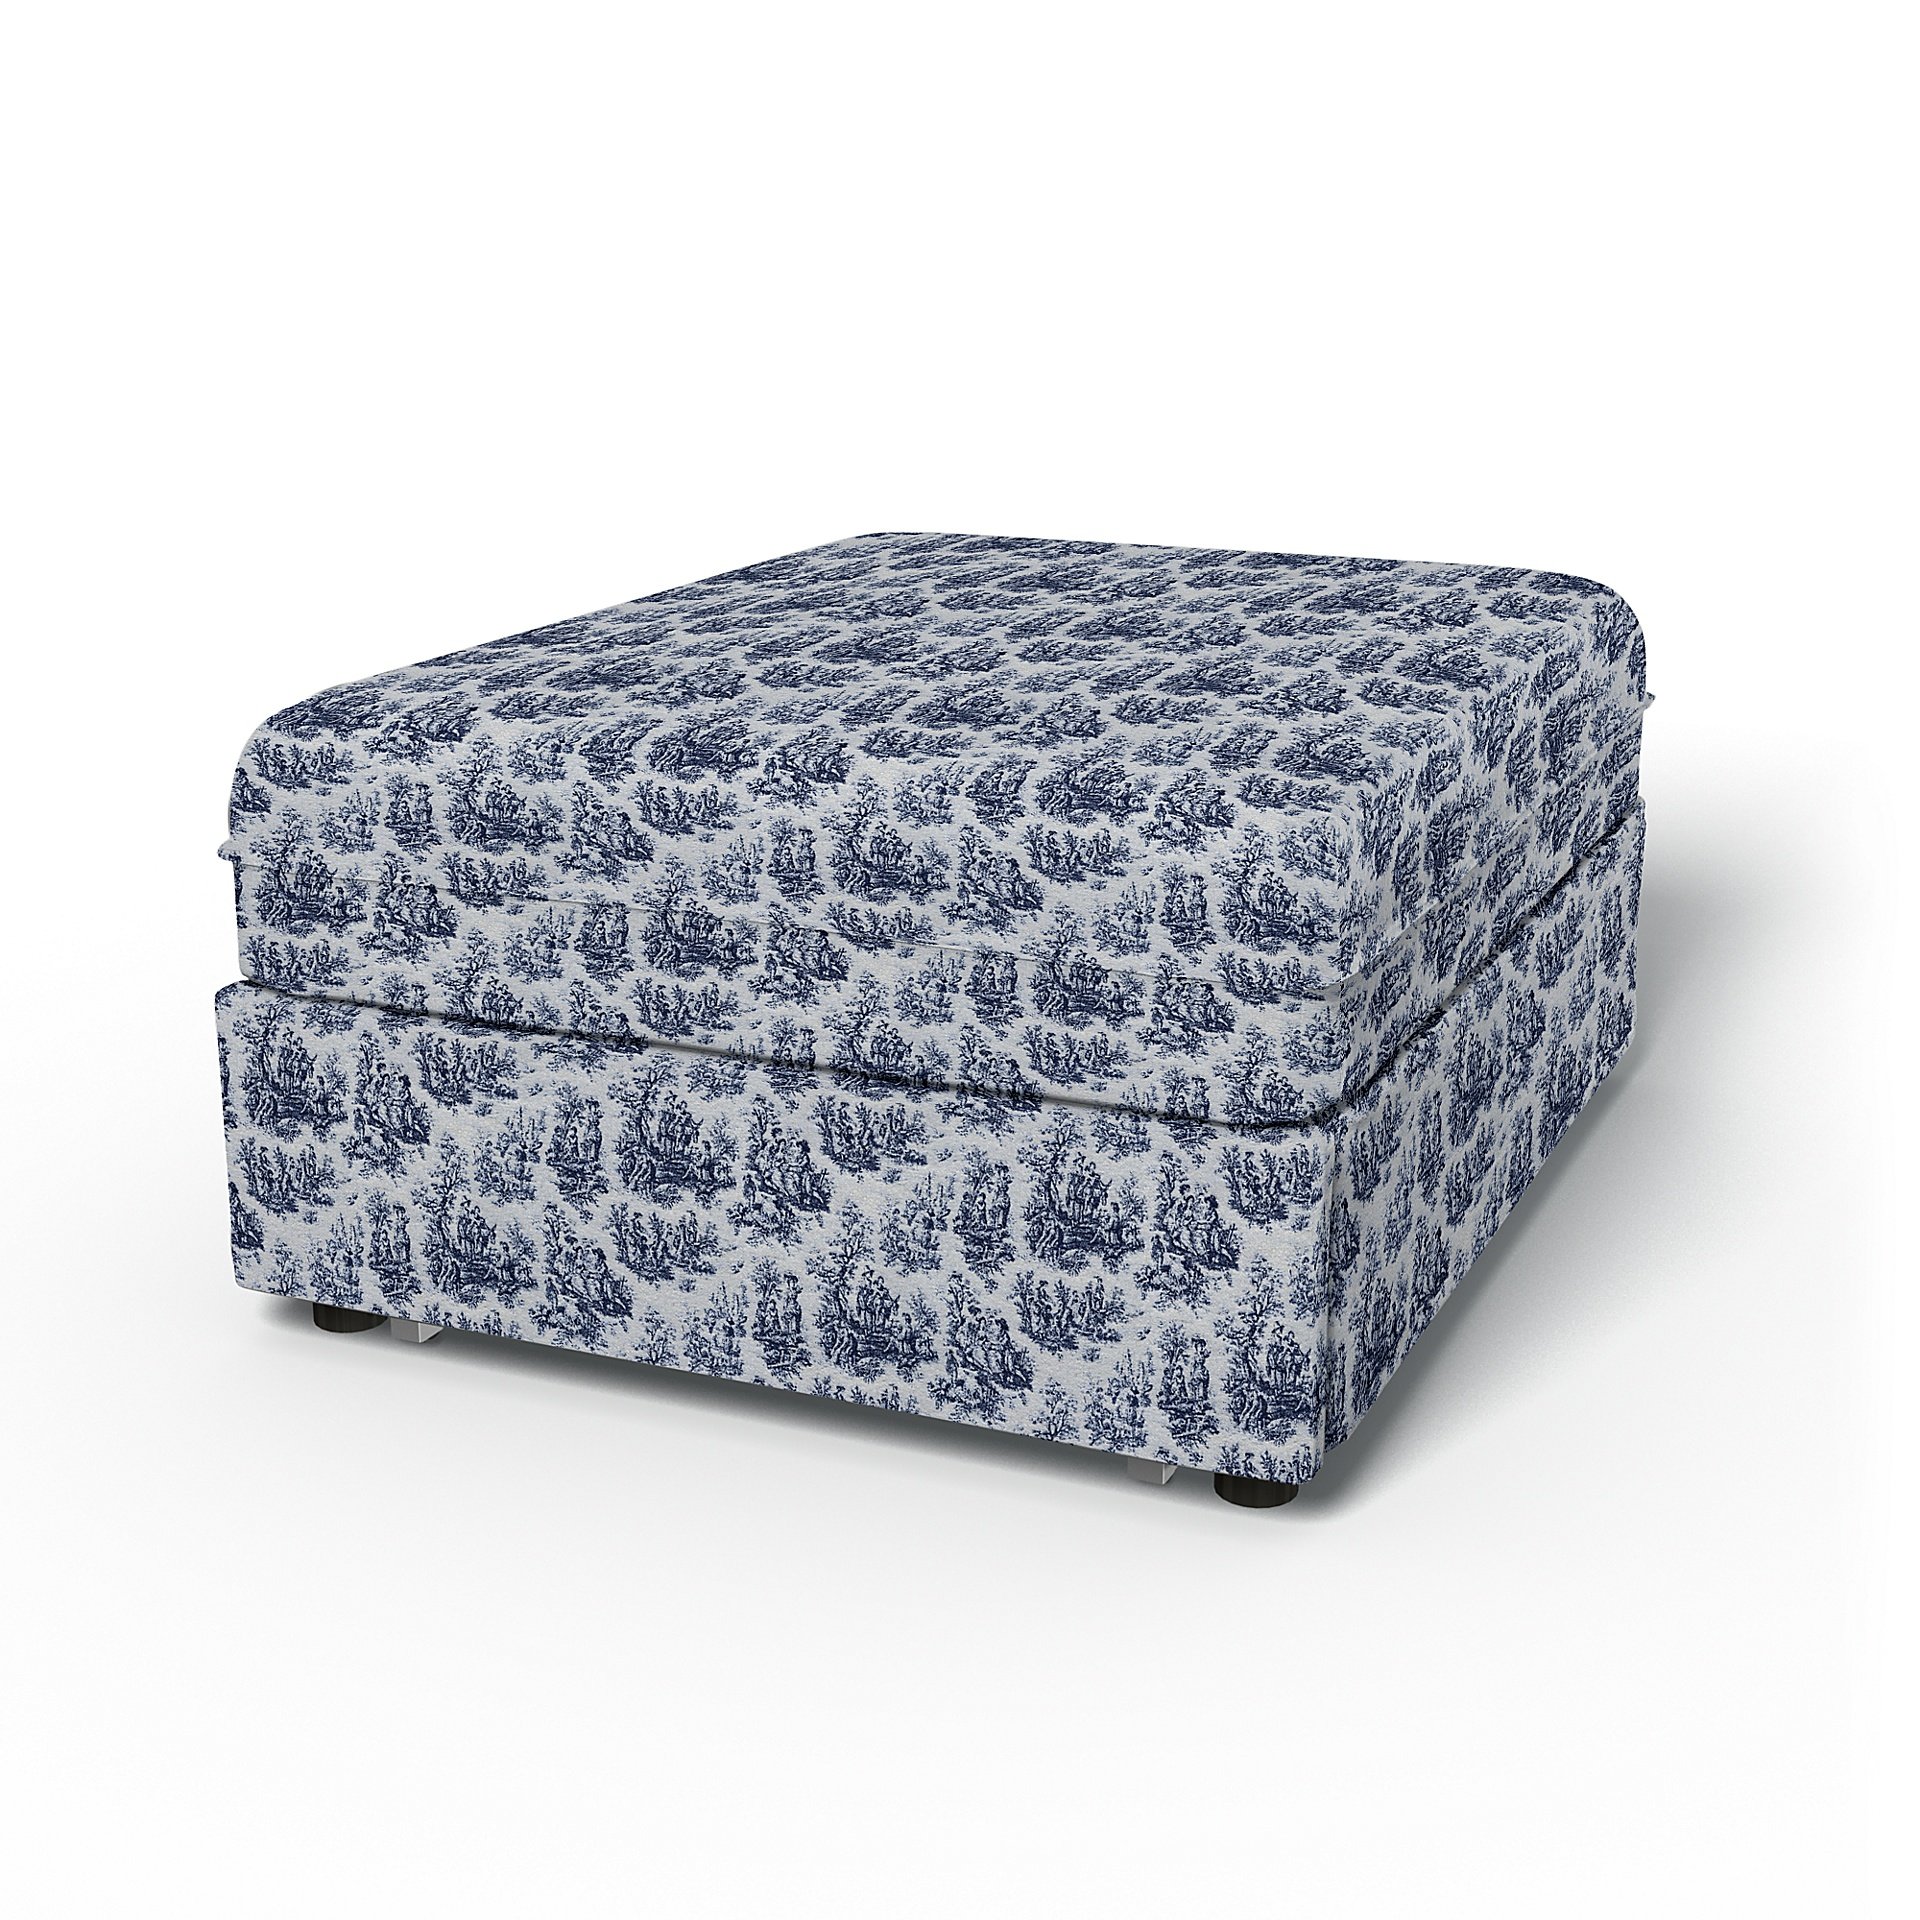 IKEA - Vallentuna Seat Module with Sofa Bed Cover 80x100cm 32x39in, Dark Blue, Boucle & Texture - Be